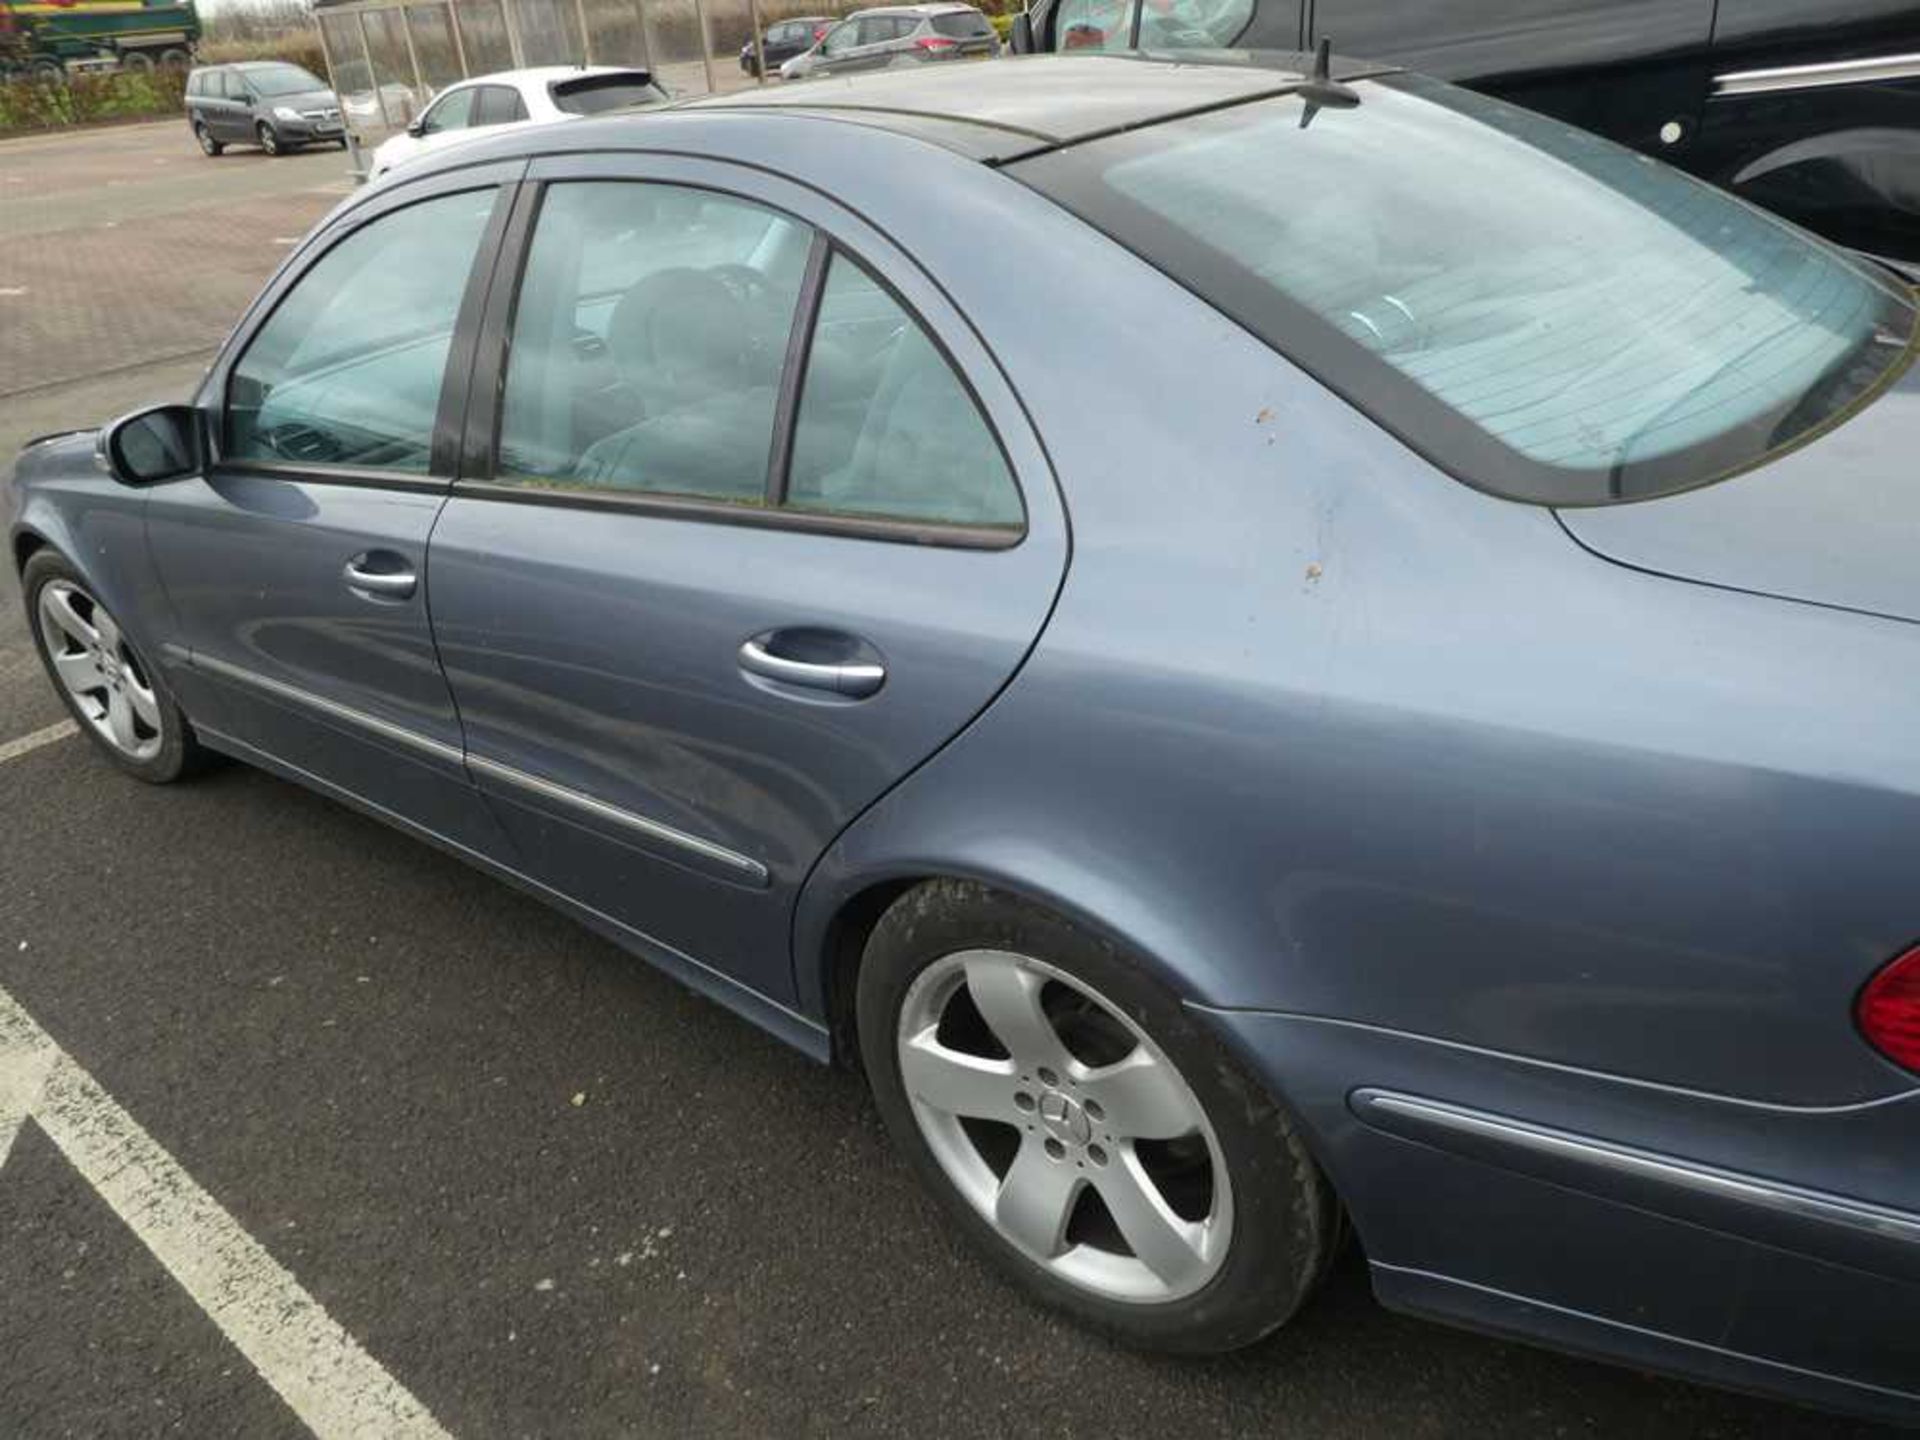 ET04 VPE (2004) Mercedes E240 Avantgarde Auto saloon, in blue, 2597cc, petrol, first registered 12/ - Image 8 of 14